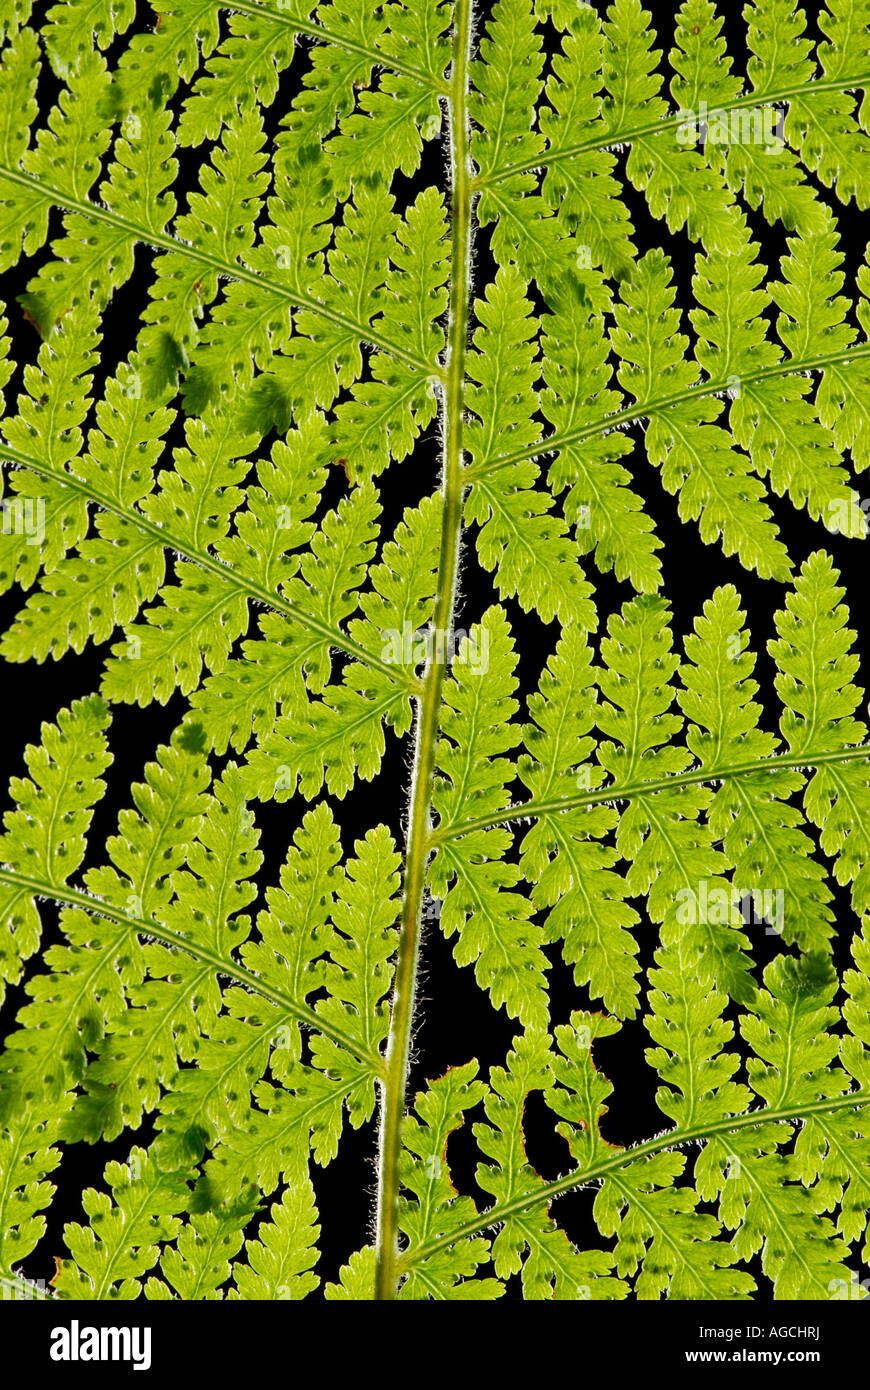 A woodfern Dryopteris sp frond backlit against black background Stock Photo